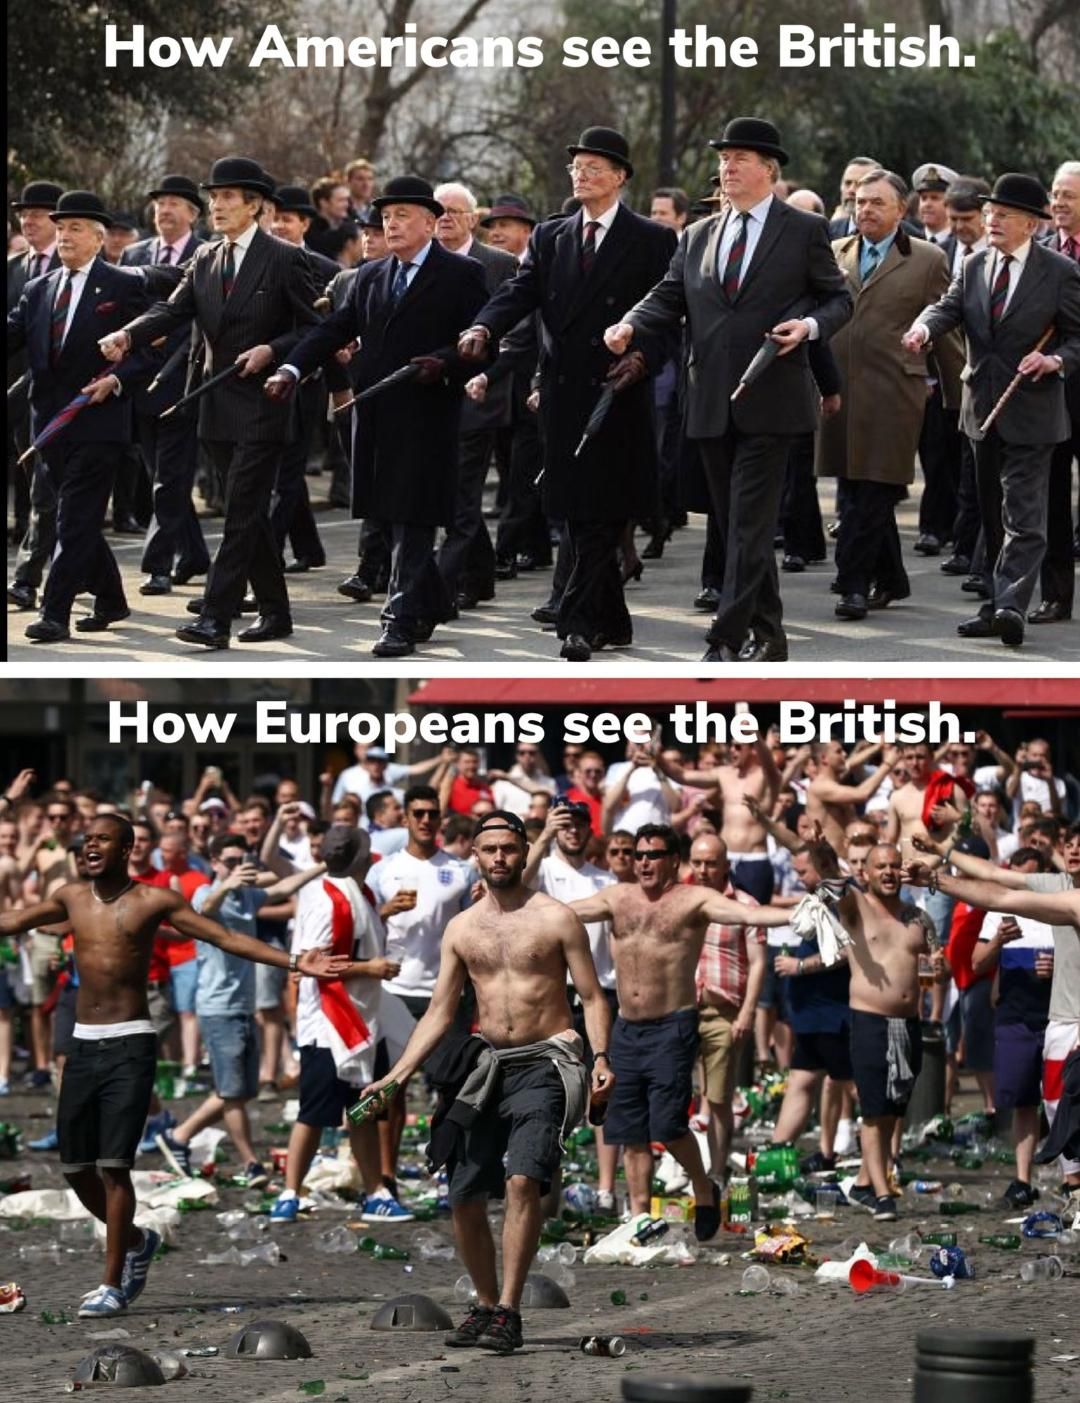 How the Europeans see the British vs how the Americans see the British.